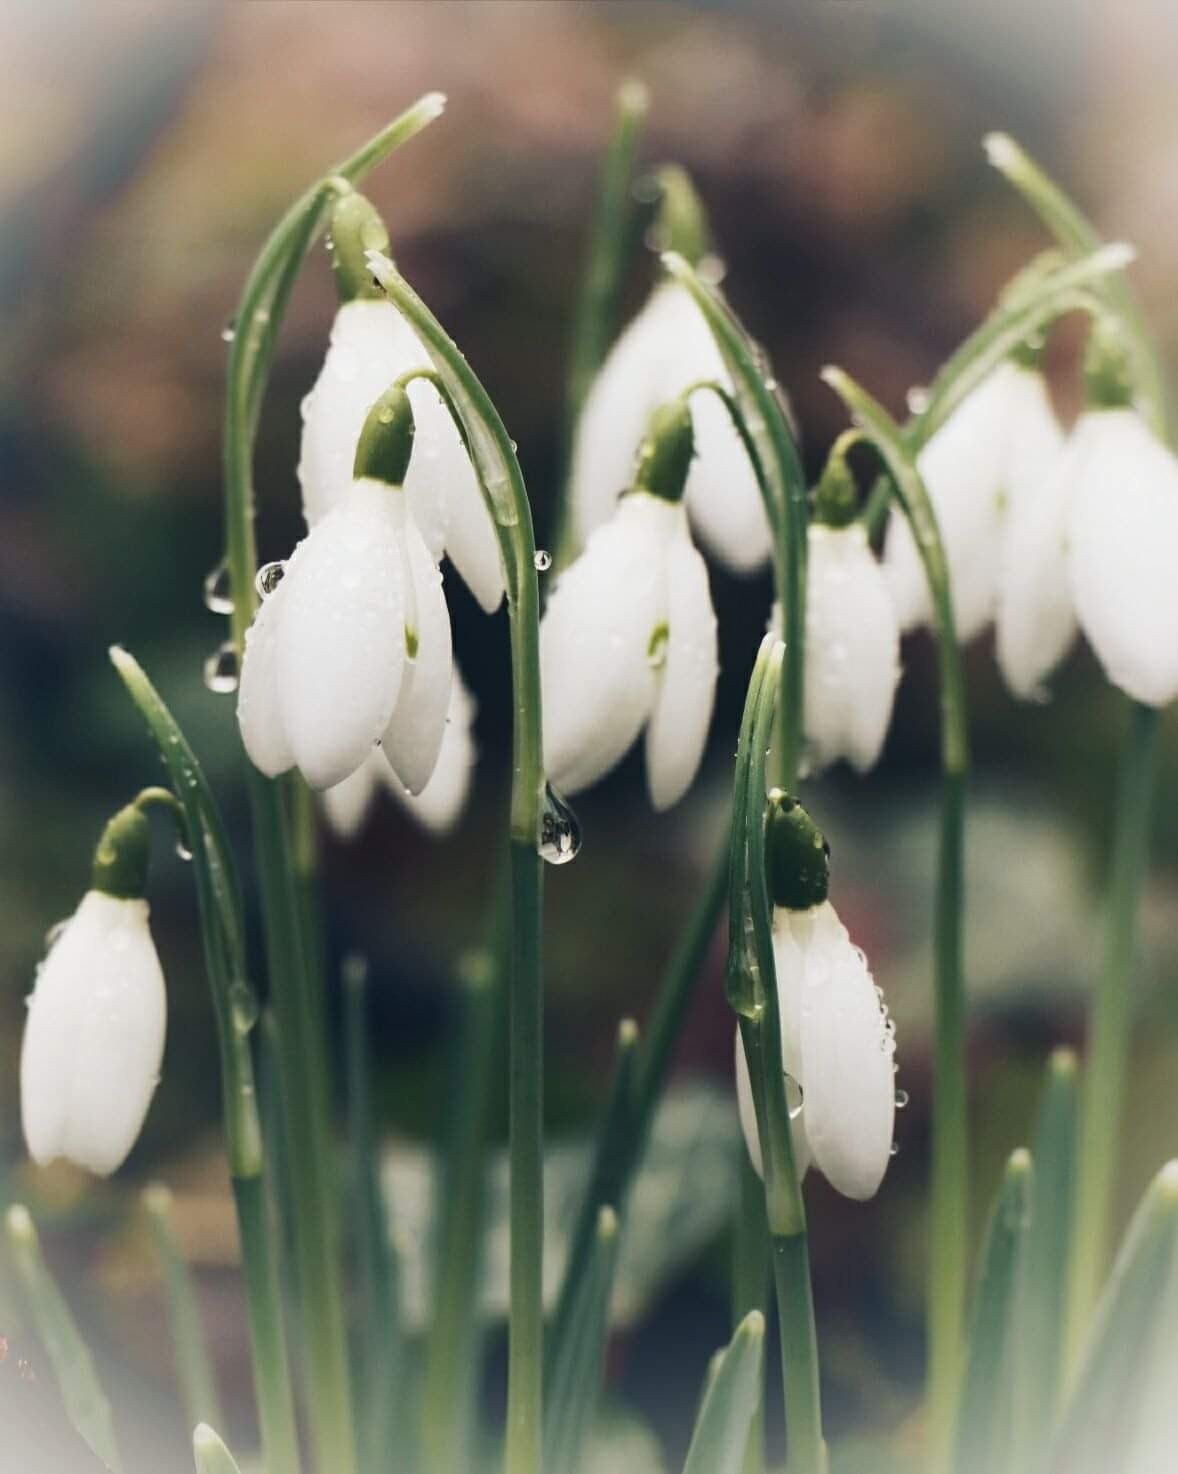 It's not spring without snowdrops!